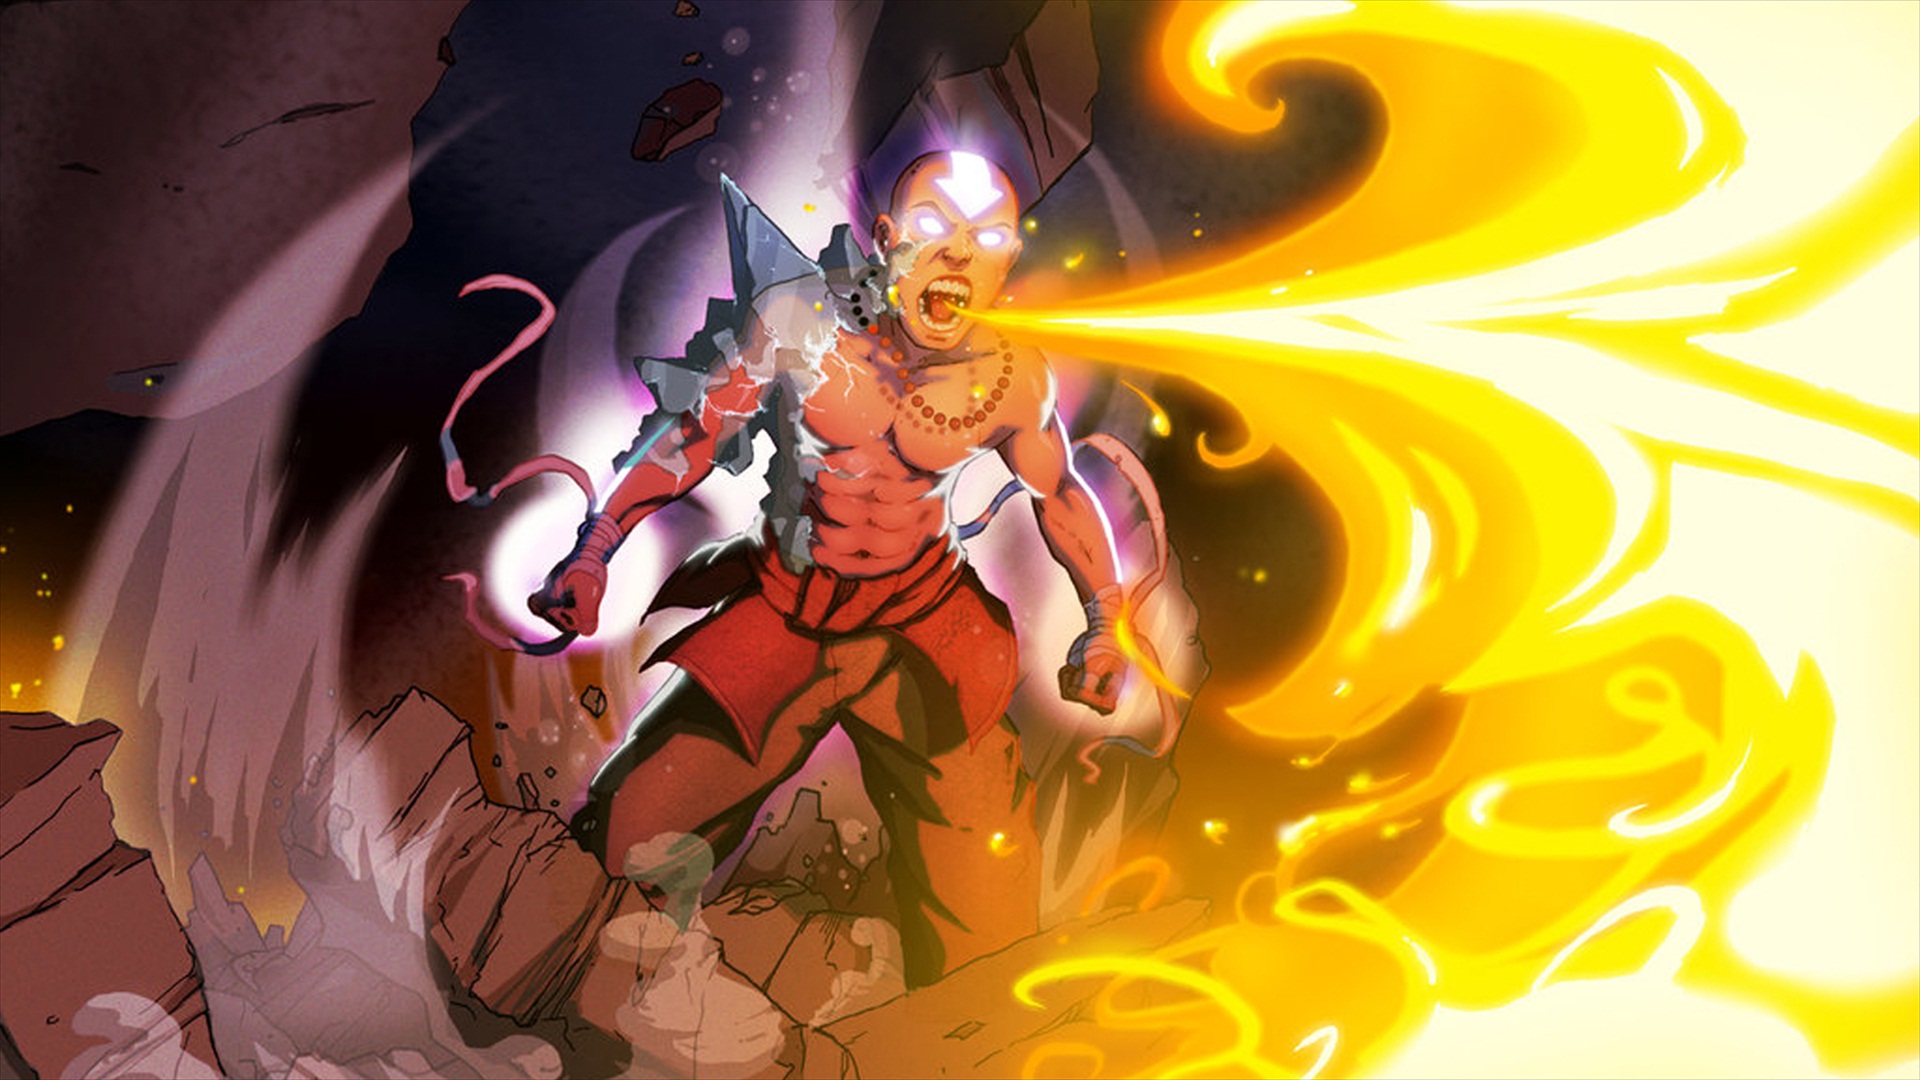 Aang Avatar Avatar The Last Airbender Fire Glowing Eyes Necklace 1920x1080